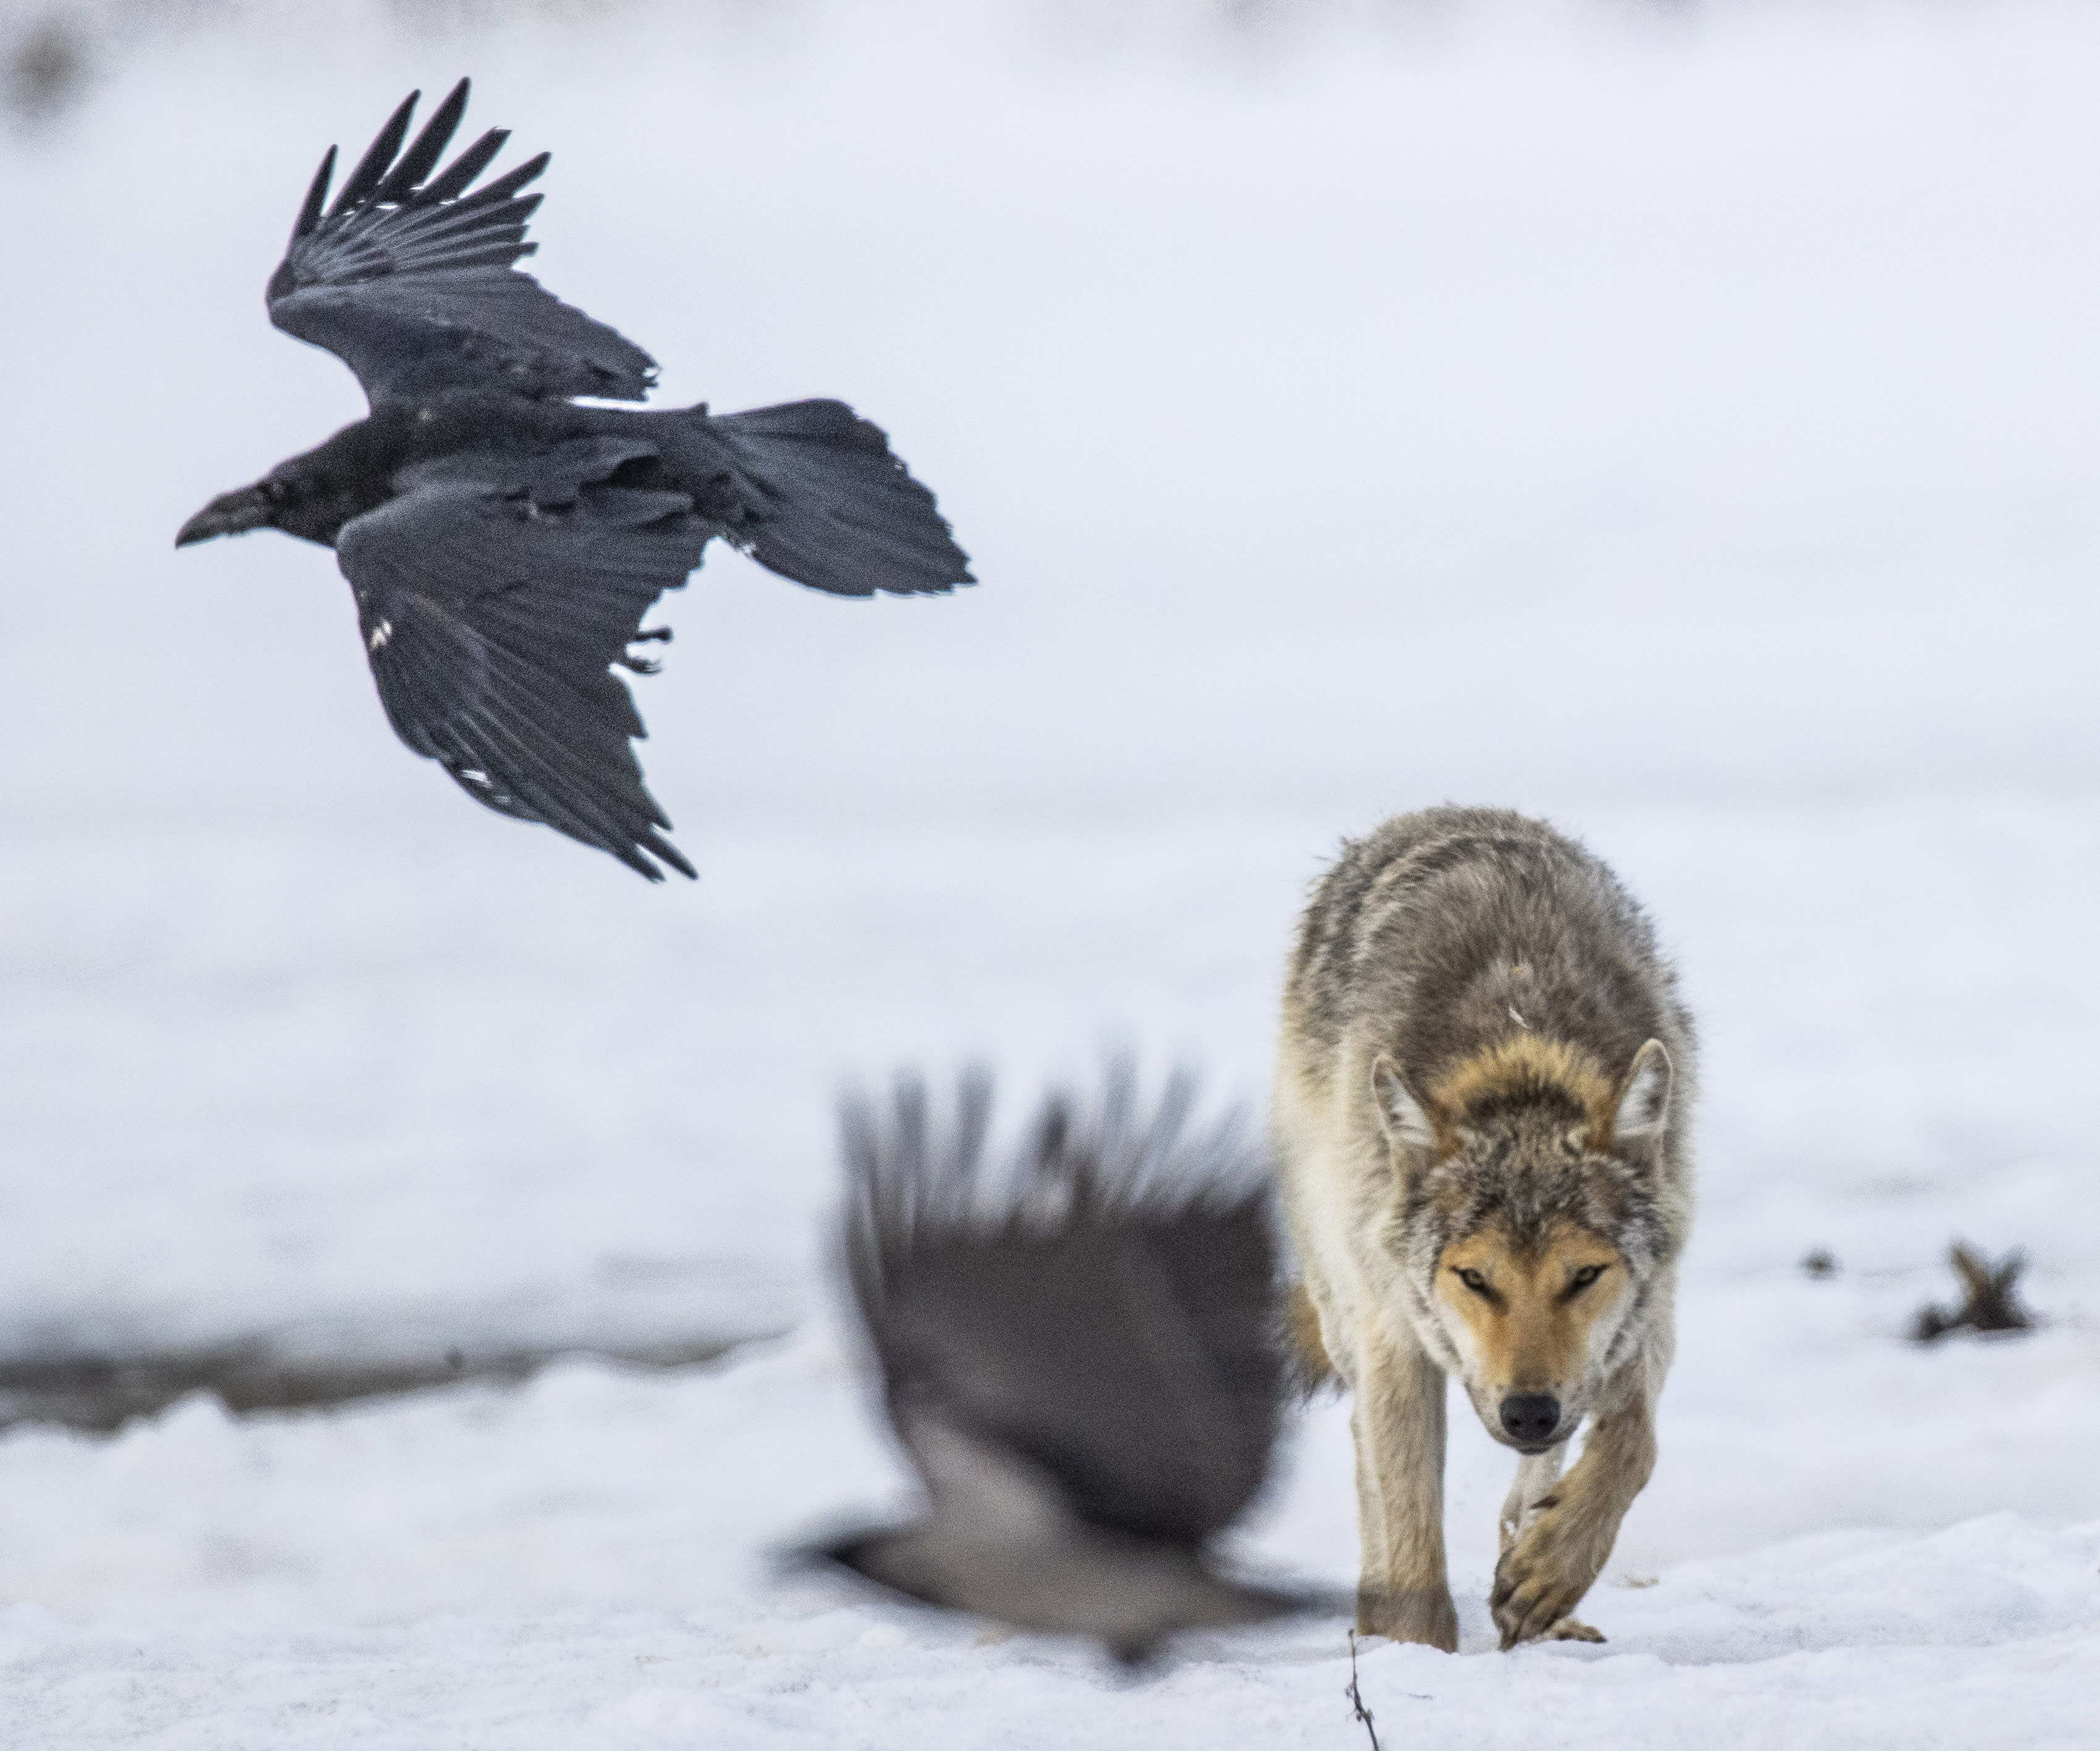 The Finnish Game Agency grants exemptions for wolf hunting